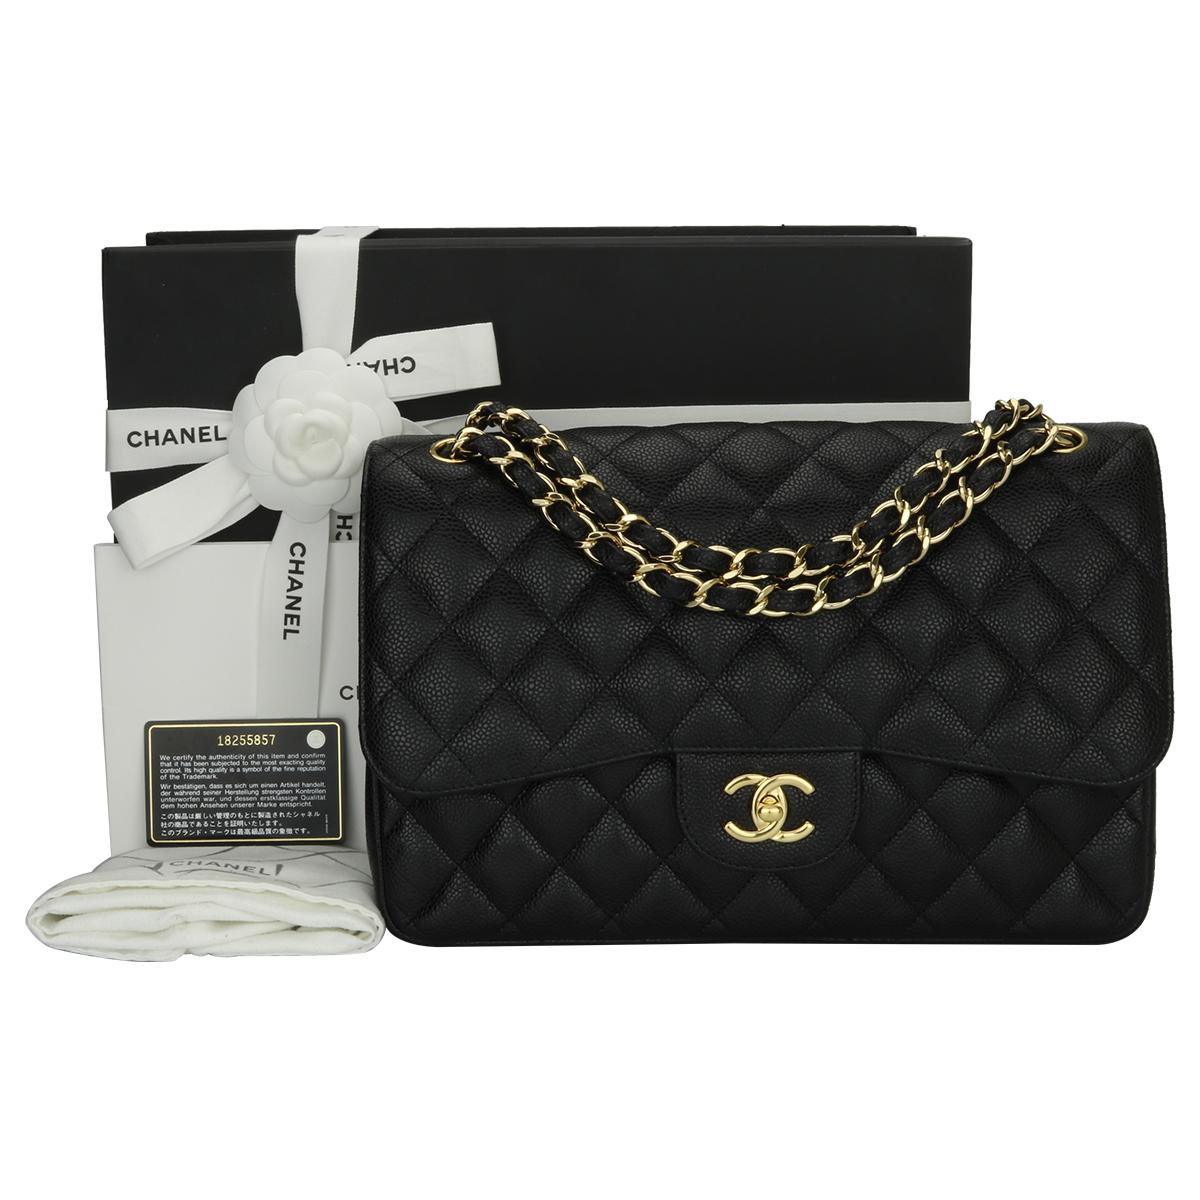 Authentic CHANEL Classic Jumbo Double Flap Black Caviar with Gold Hardware 2014.

This stunning bag is in a pristine-brand new condition, the bag still holds its original shape, and the hardware is still very shiny. Leather smells fresh as if